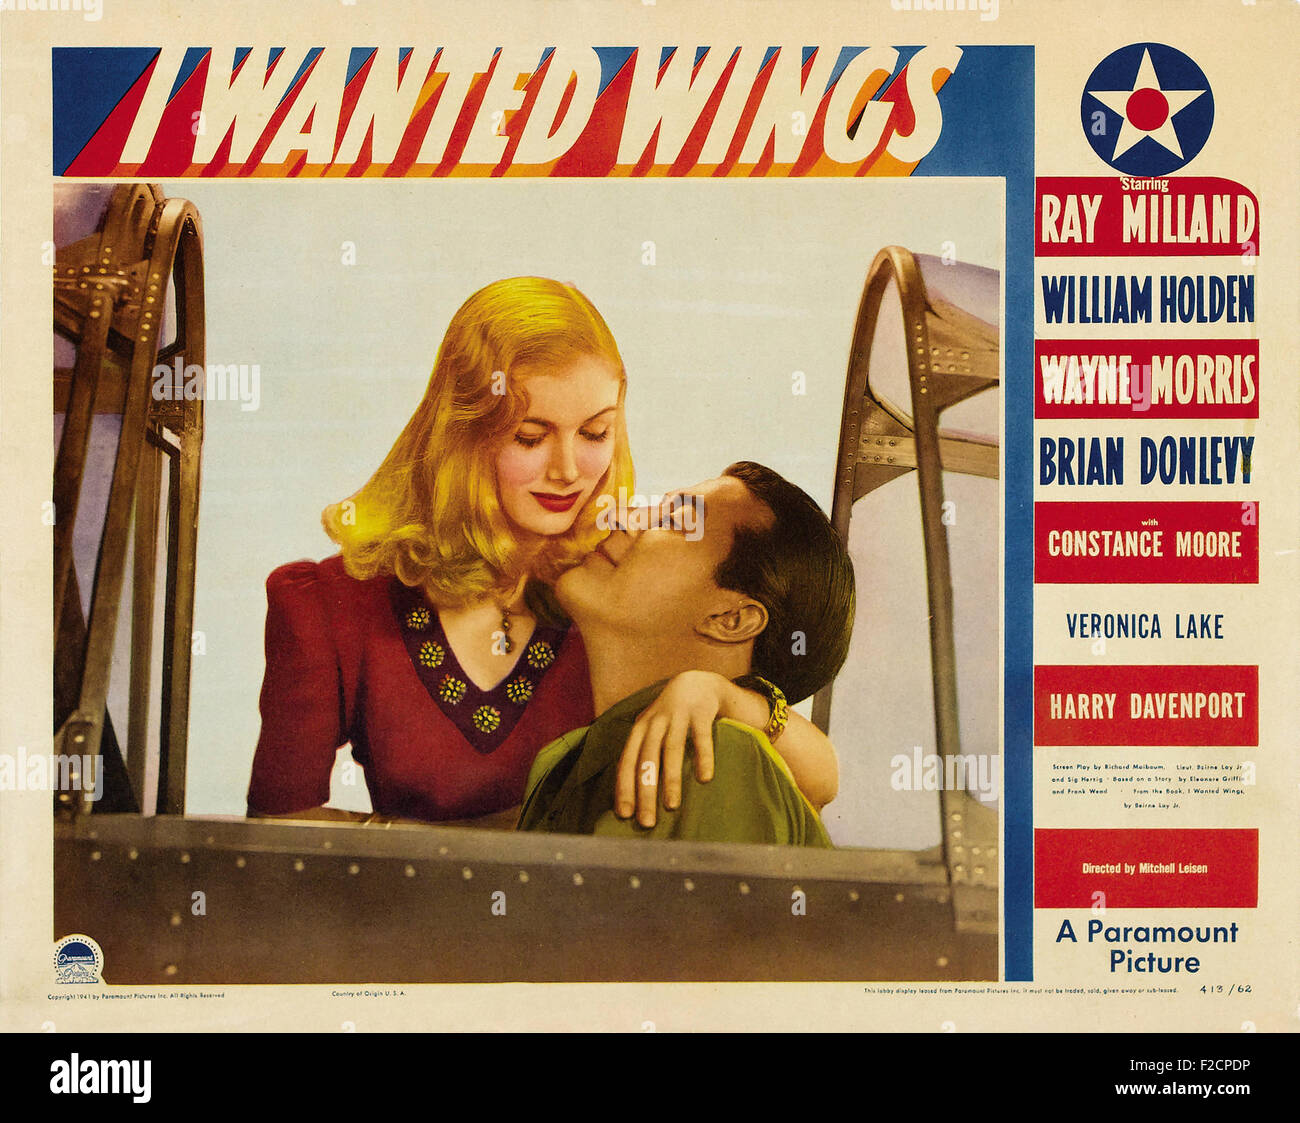 I Wanted Wings 04 - Movie Poster Stock Photo - Alamy